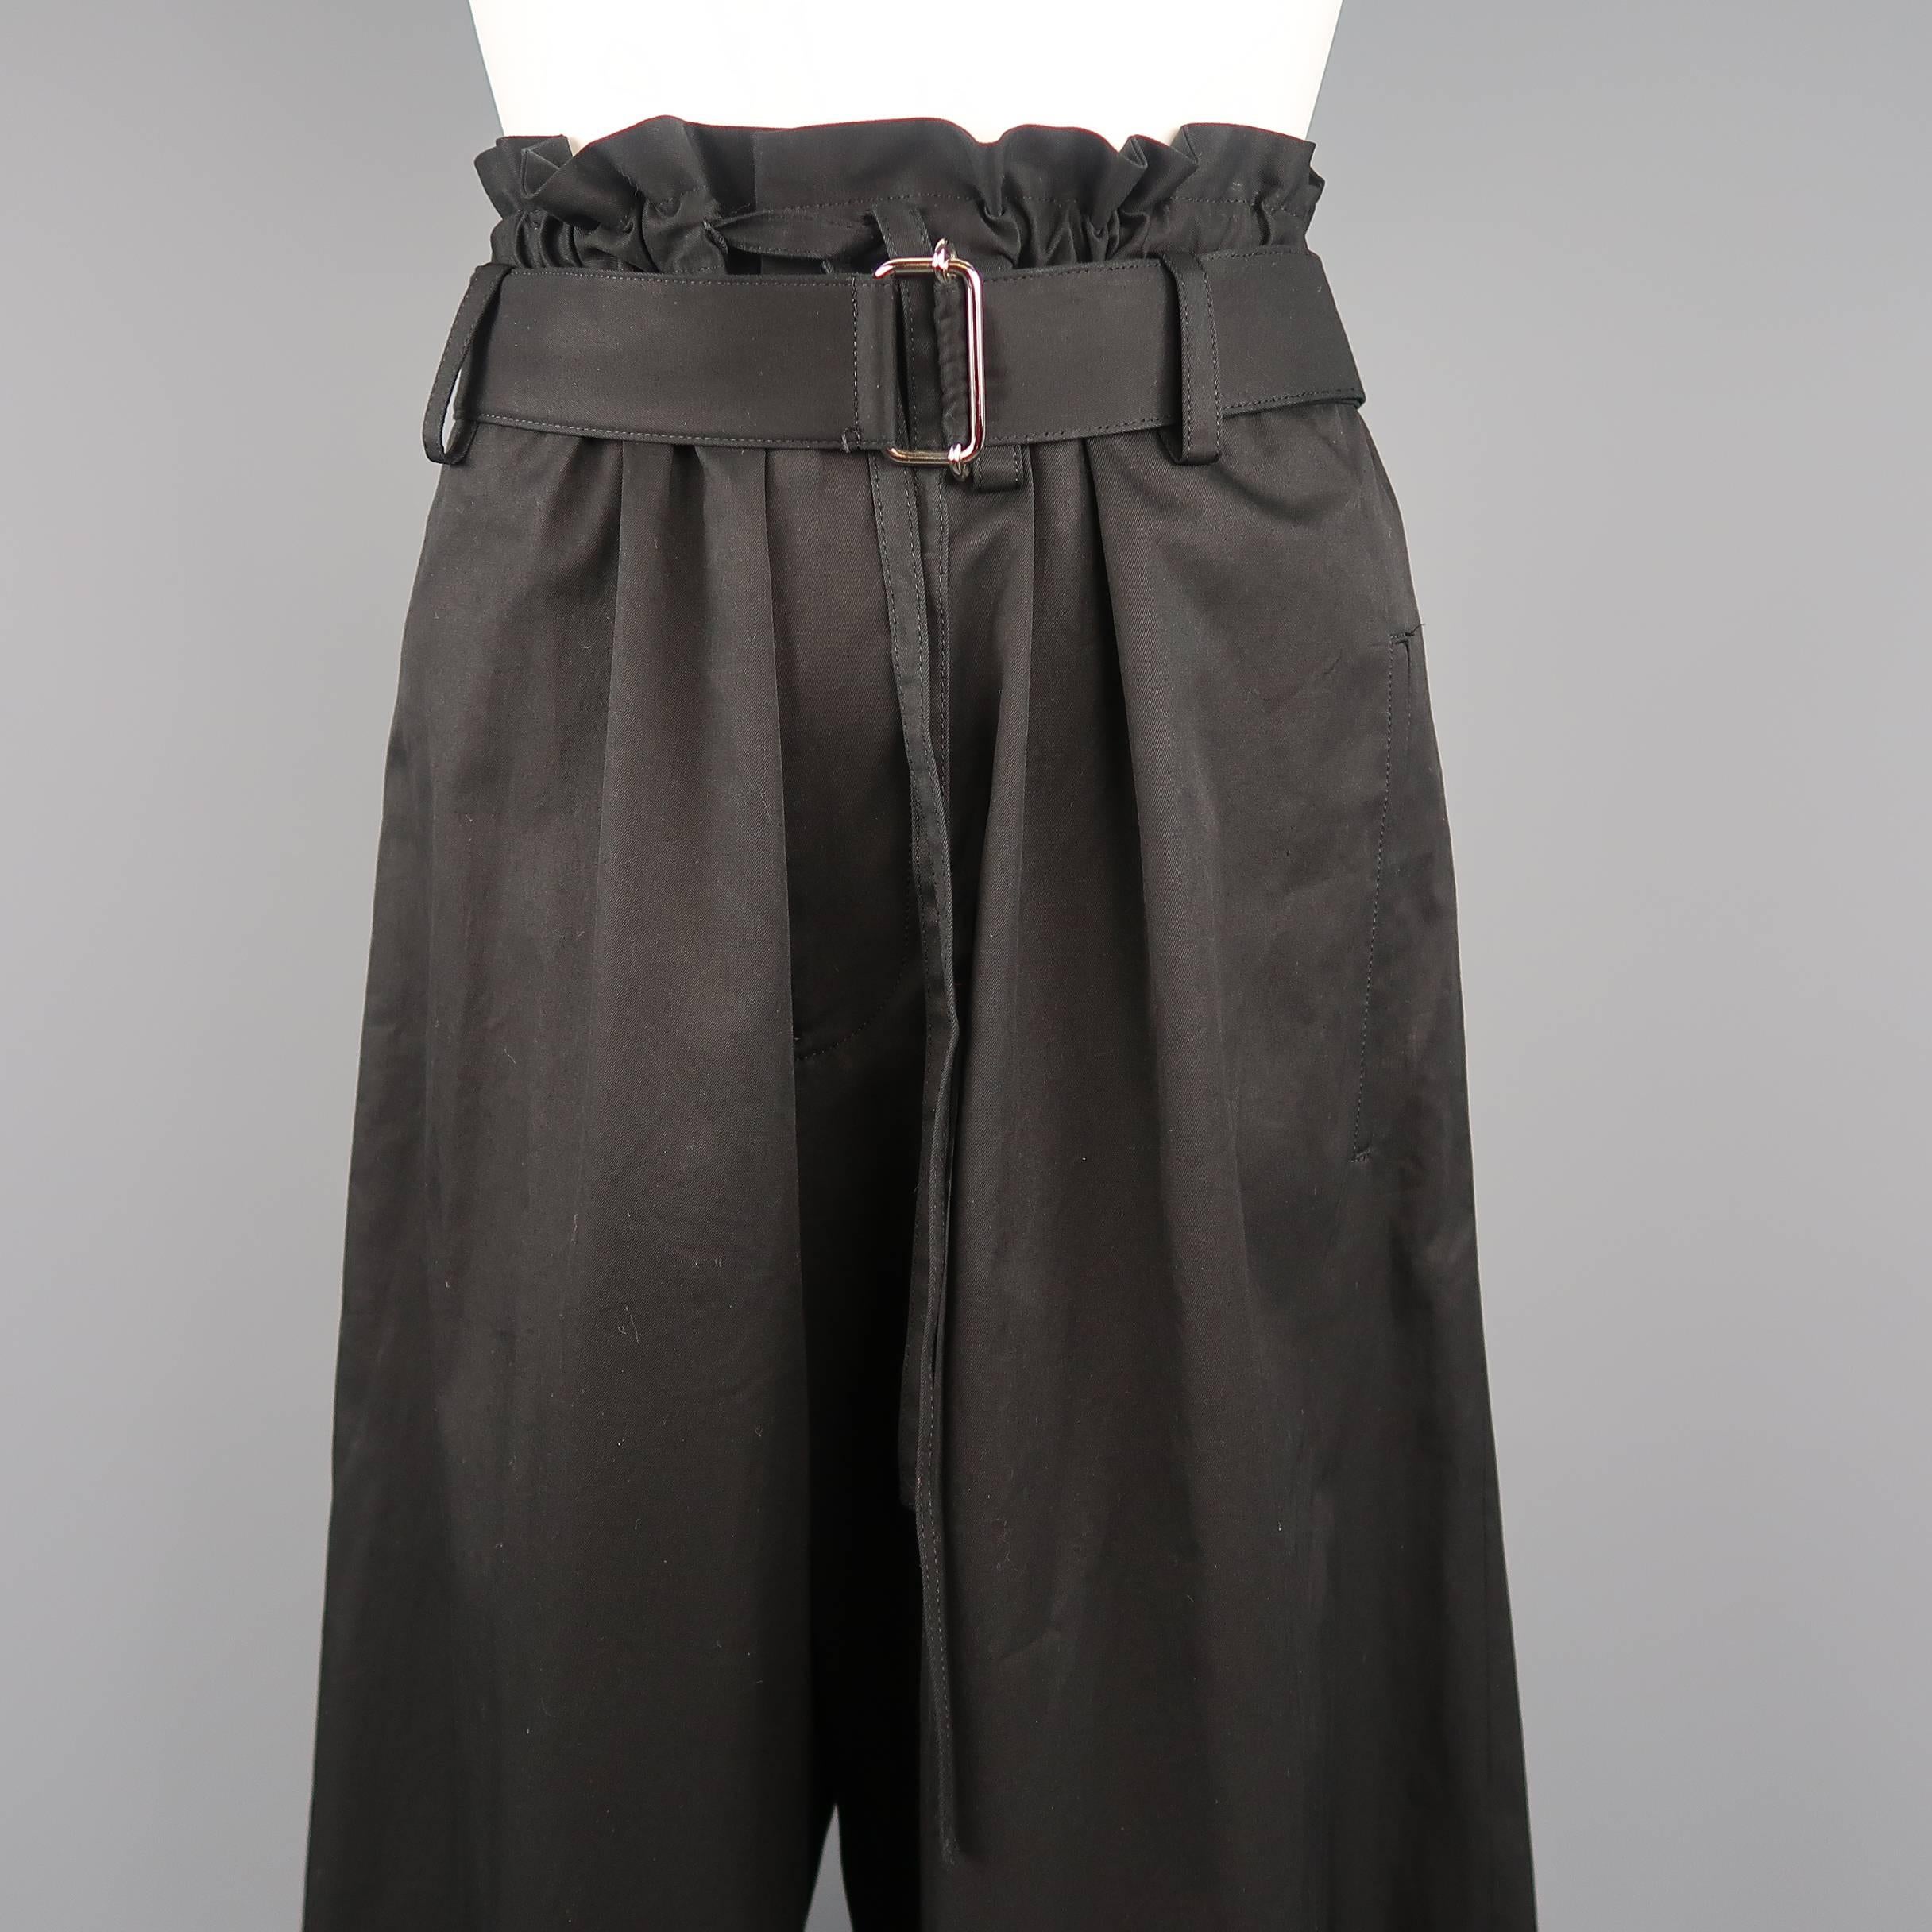 Yohji Yamamoto + Noir pants come in a light weight cotton poplin with a gathered drawstring waist with belt and dramatic wide leg. Made in Japan.
 
Excellent Pre-Owned Condition.
Marked: JP 2
 
Measurements:
 
Waist: 34 in.